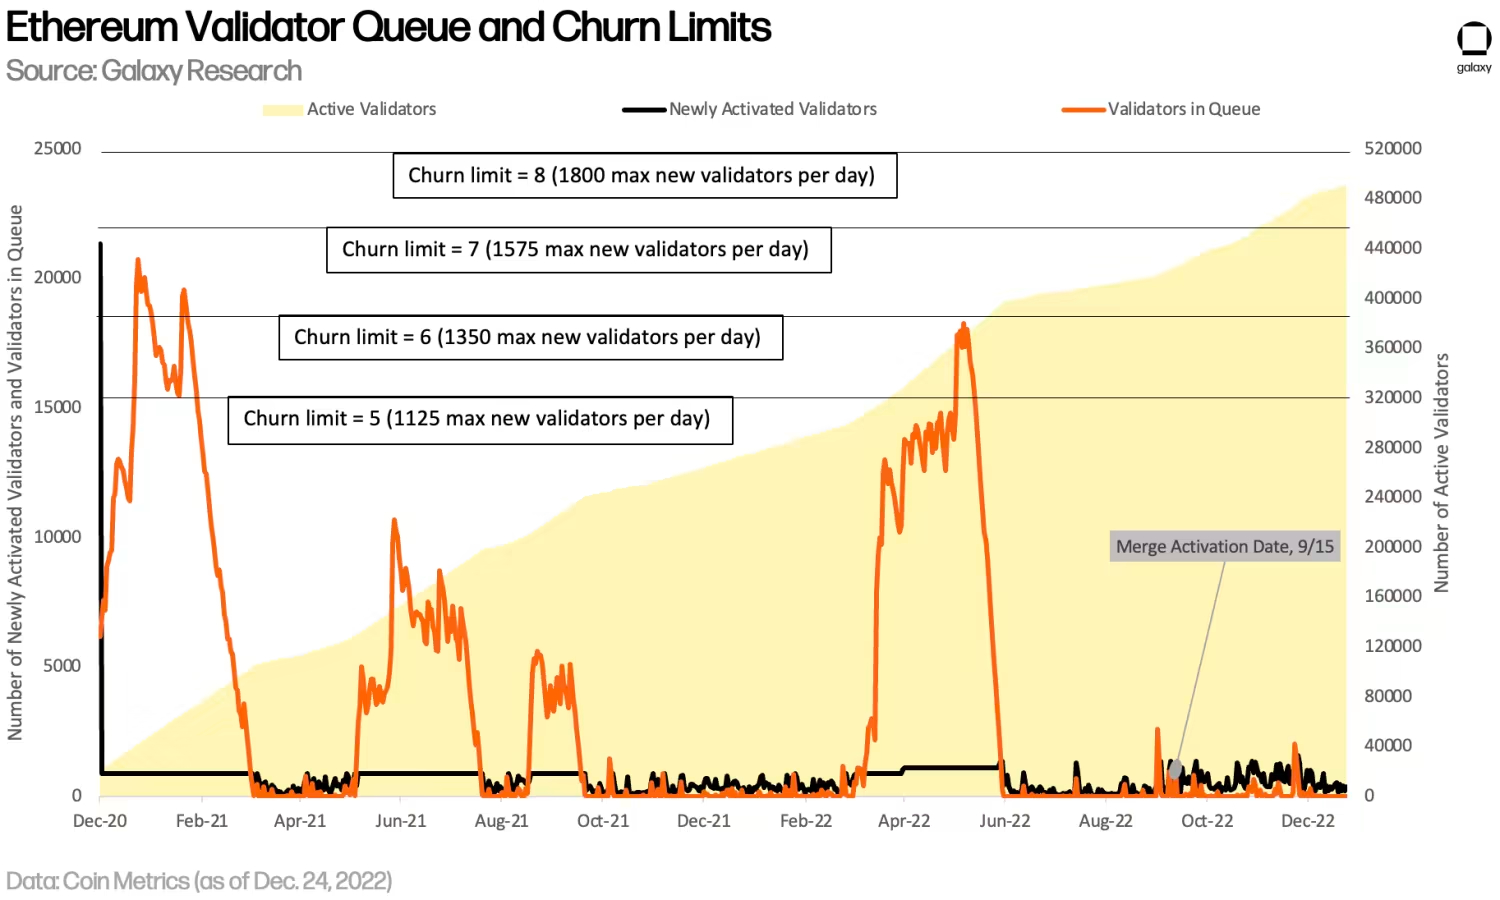 A number of factors can lead to a spiking number of validators waiting in the activation queue, including relation to the churn limit cliff and participant sentiment toward staking. Source: Christine Kim, 100 Days After the Merge, Galaxy Digital